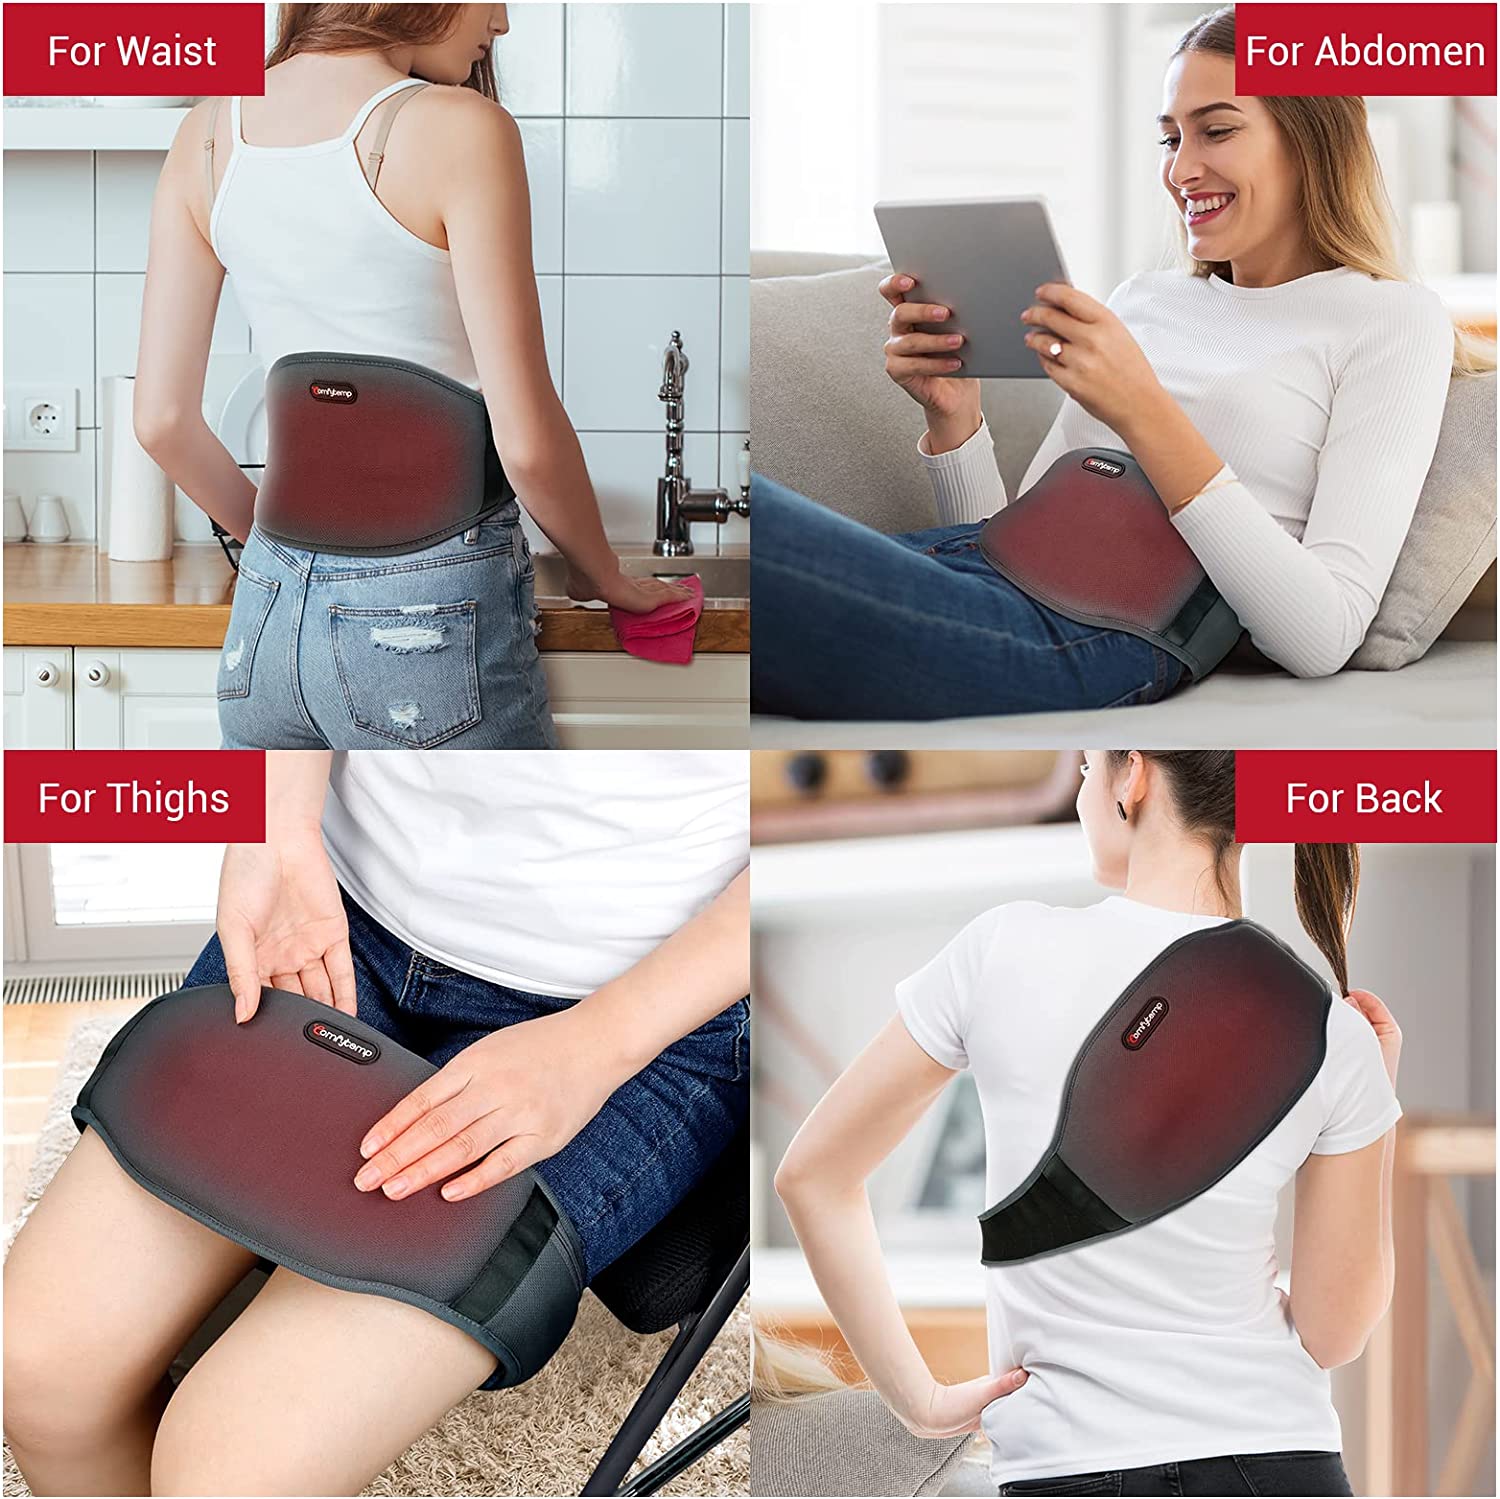 MoveHeat™ Cordless Lumbar and Abdominal Heating Pad with Massager